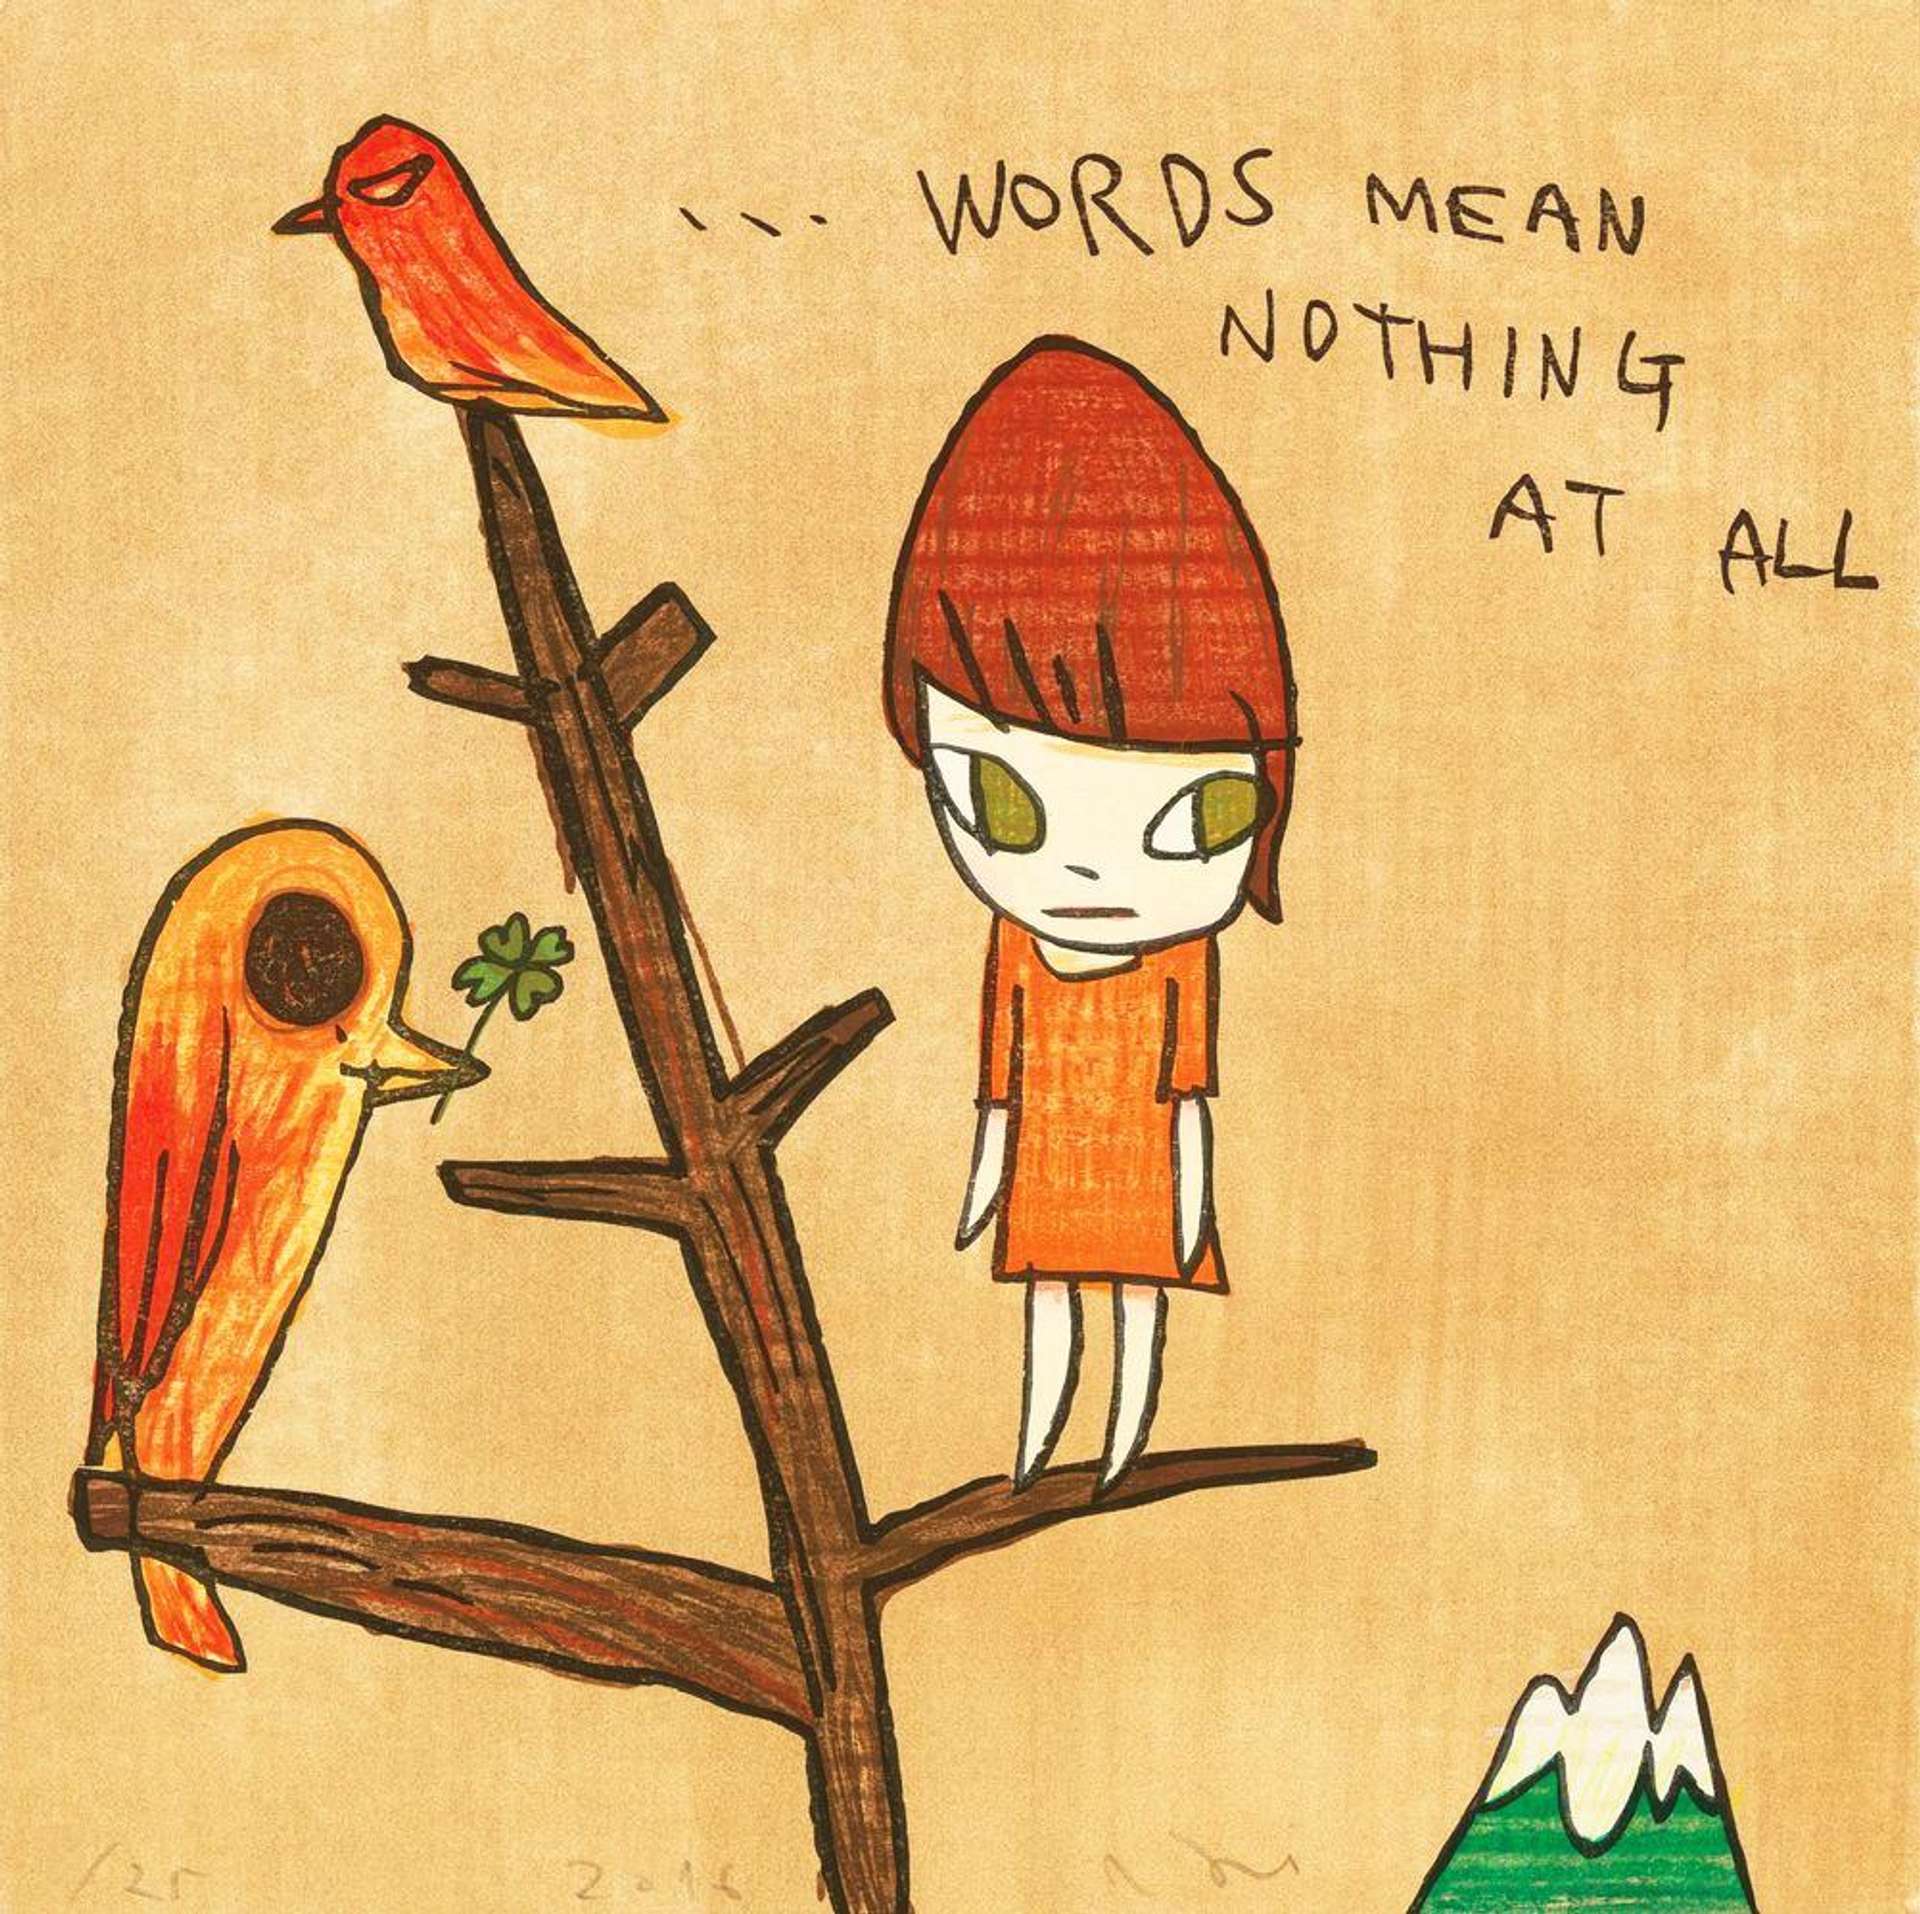 Yoshitomo Nara’s Words Mean Nothing At All: Girl standing on tree limb with two birds